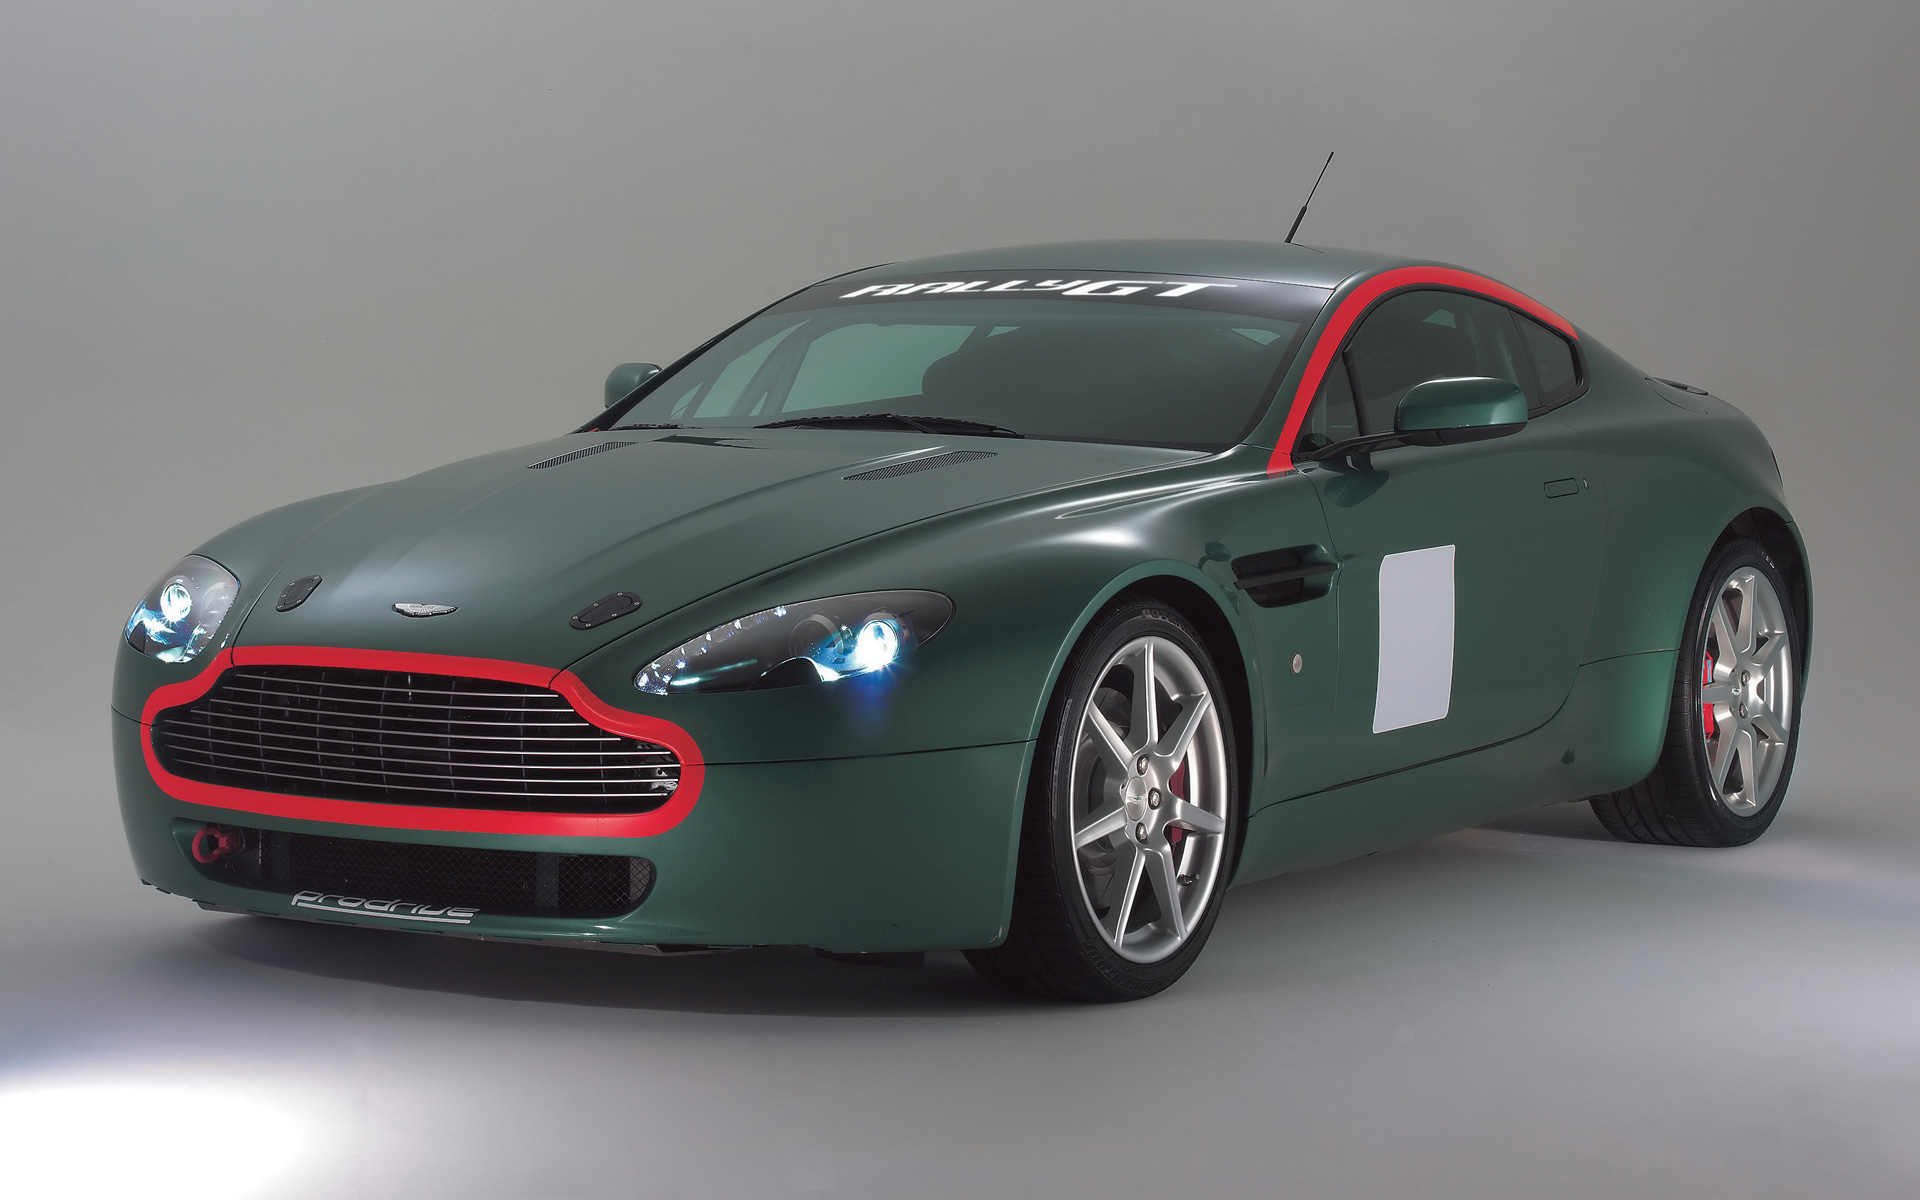 Aston Martin V8 Vantage Rally GT Backgrounds, Compatible - PC, Mobile, Gadgets| 1920x1200 px